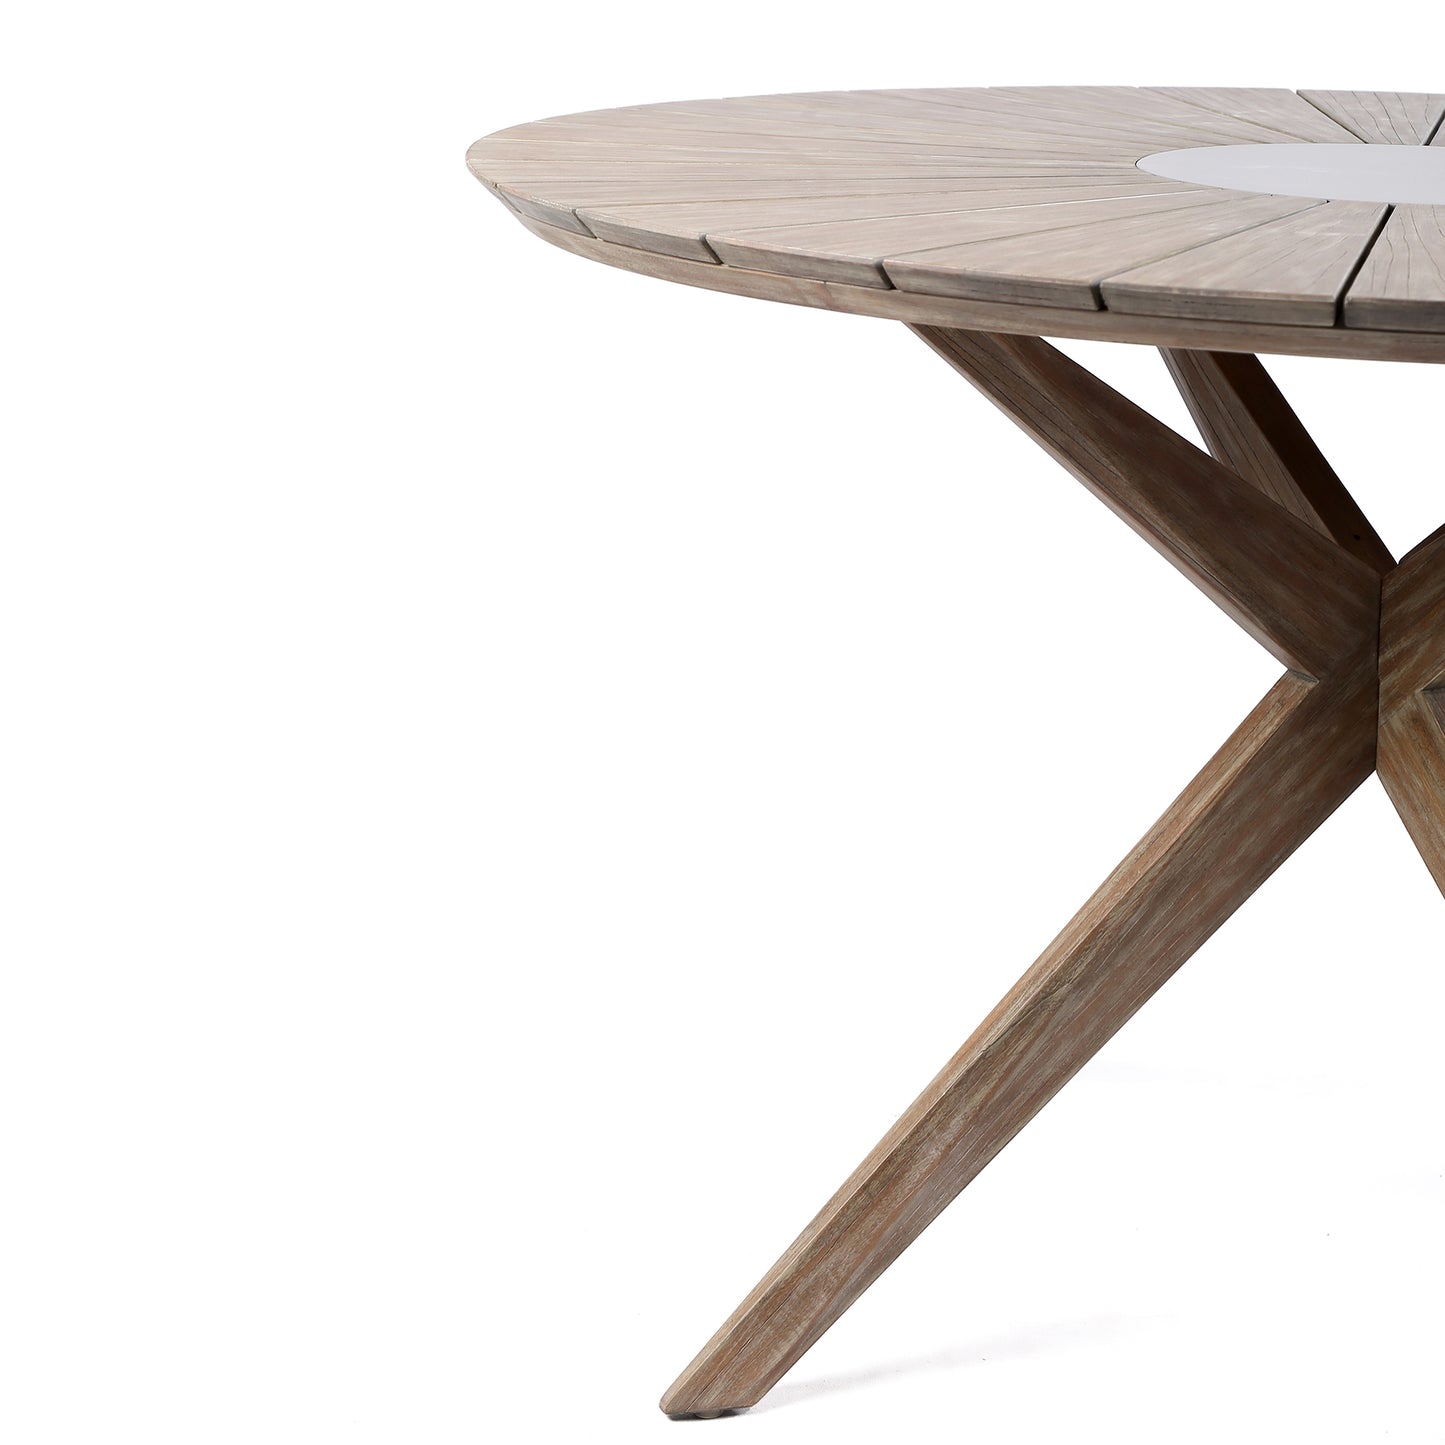 Oasis Outdoor Light Eucalyptus Wood and Concrete Round Dining Table